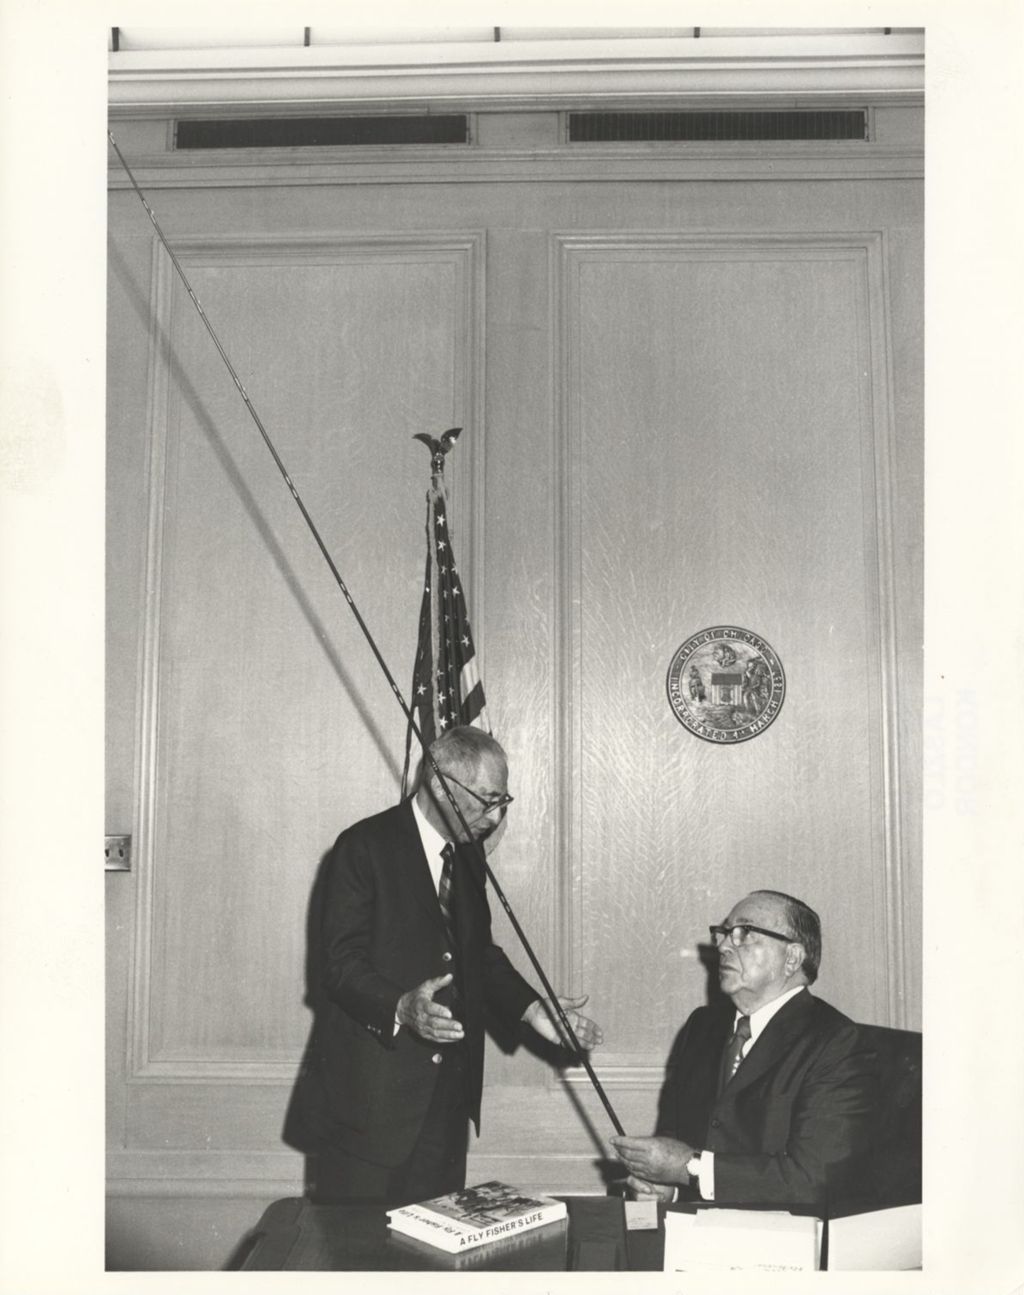 Charles Ritz presenting gifts to Richard J. Daley